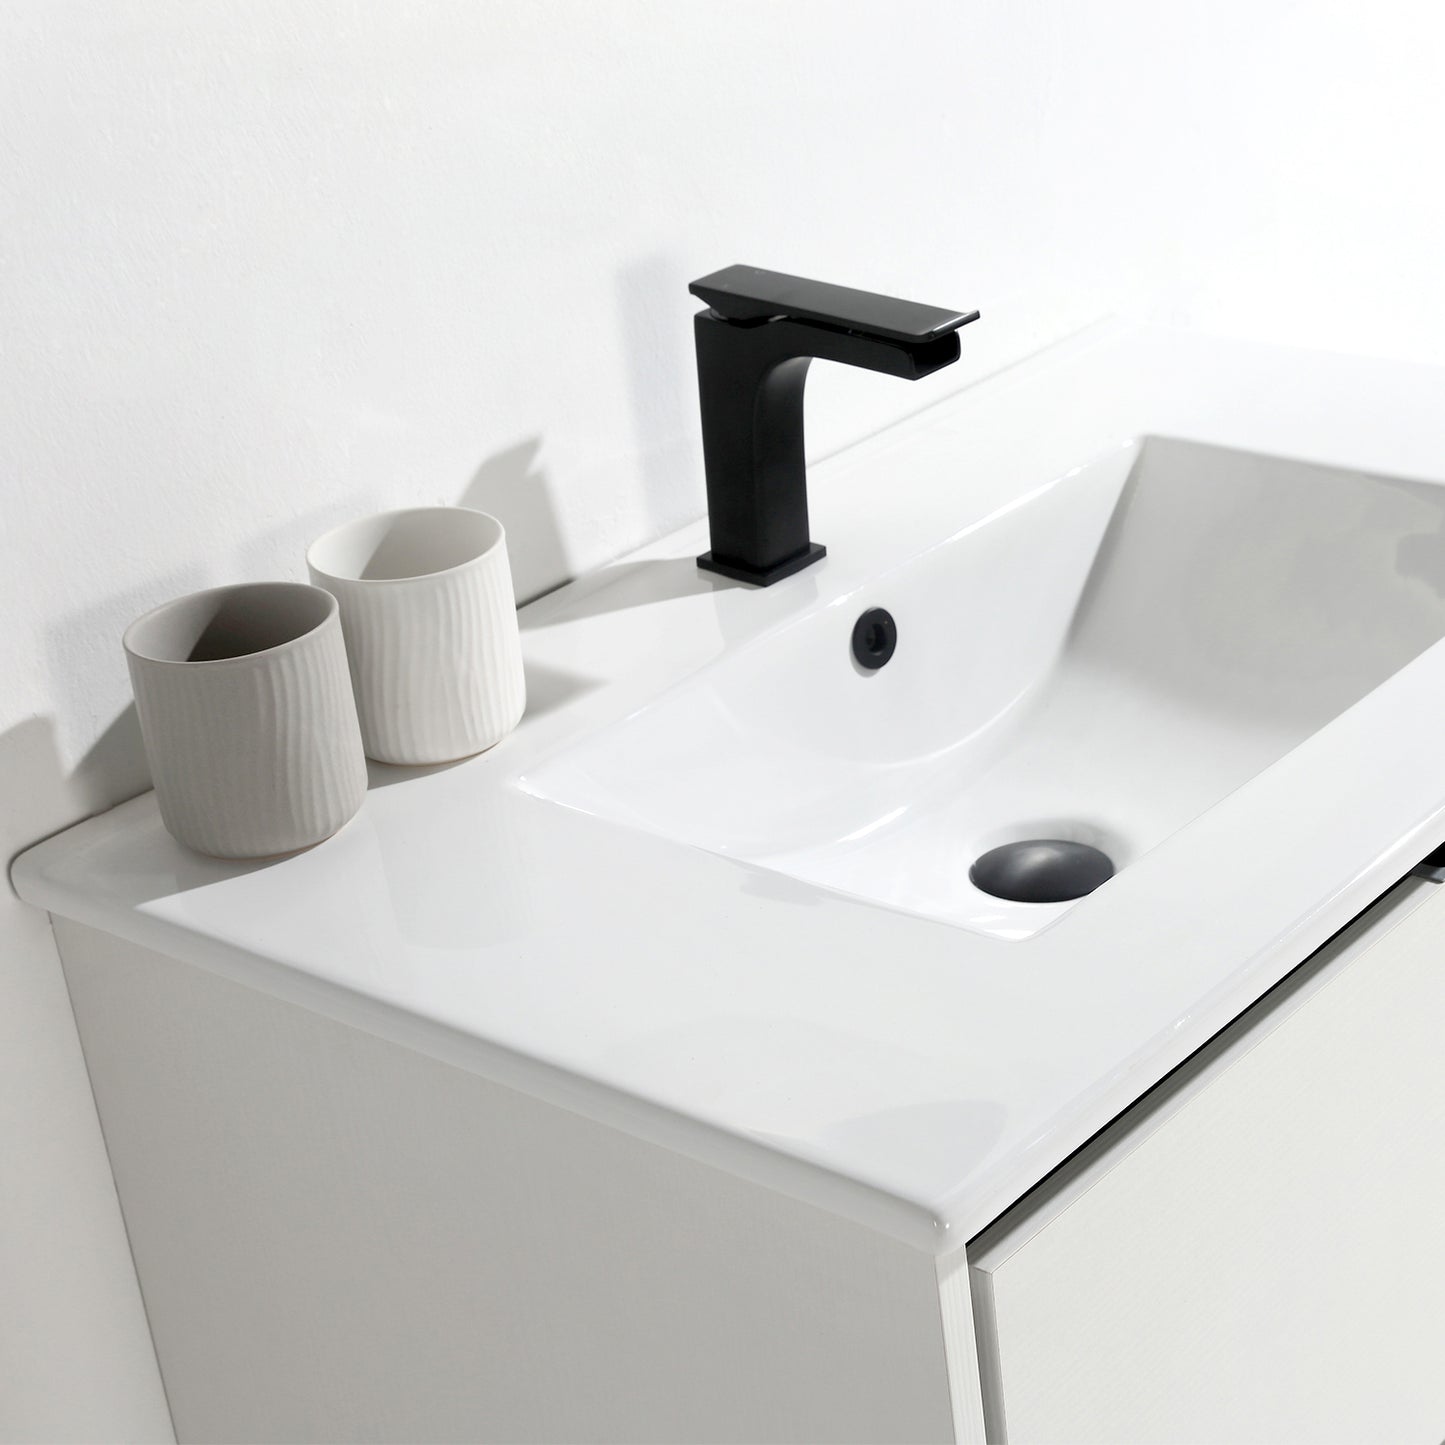 30 inches Floating Bathroom Vanity Combo with Integrated Single Sink and 1 Soft Close Drawer